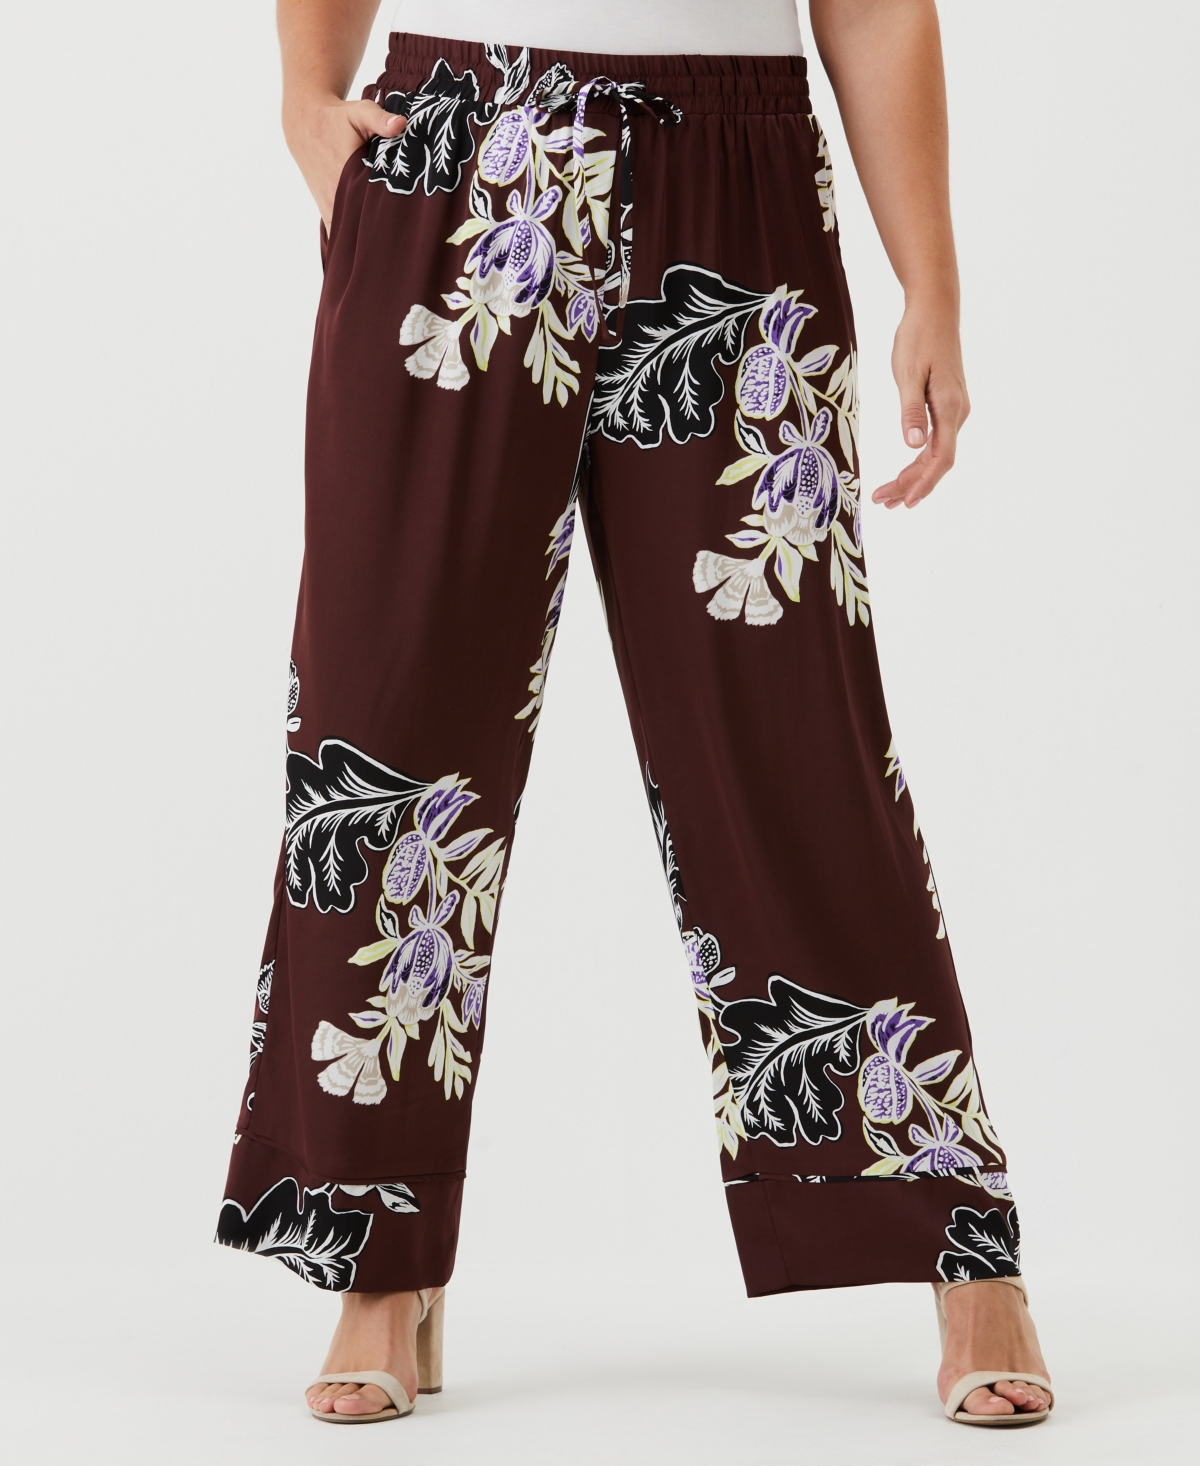 Plus Size Drawstring Pant with Piping - Decadent Chocolate